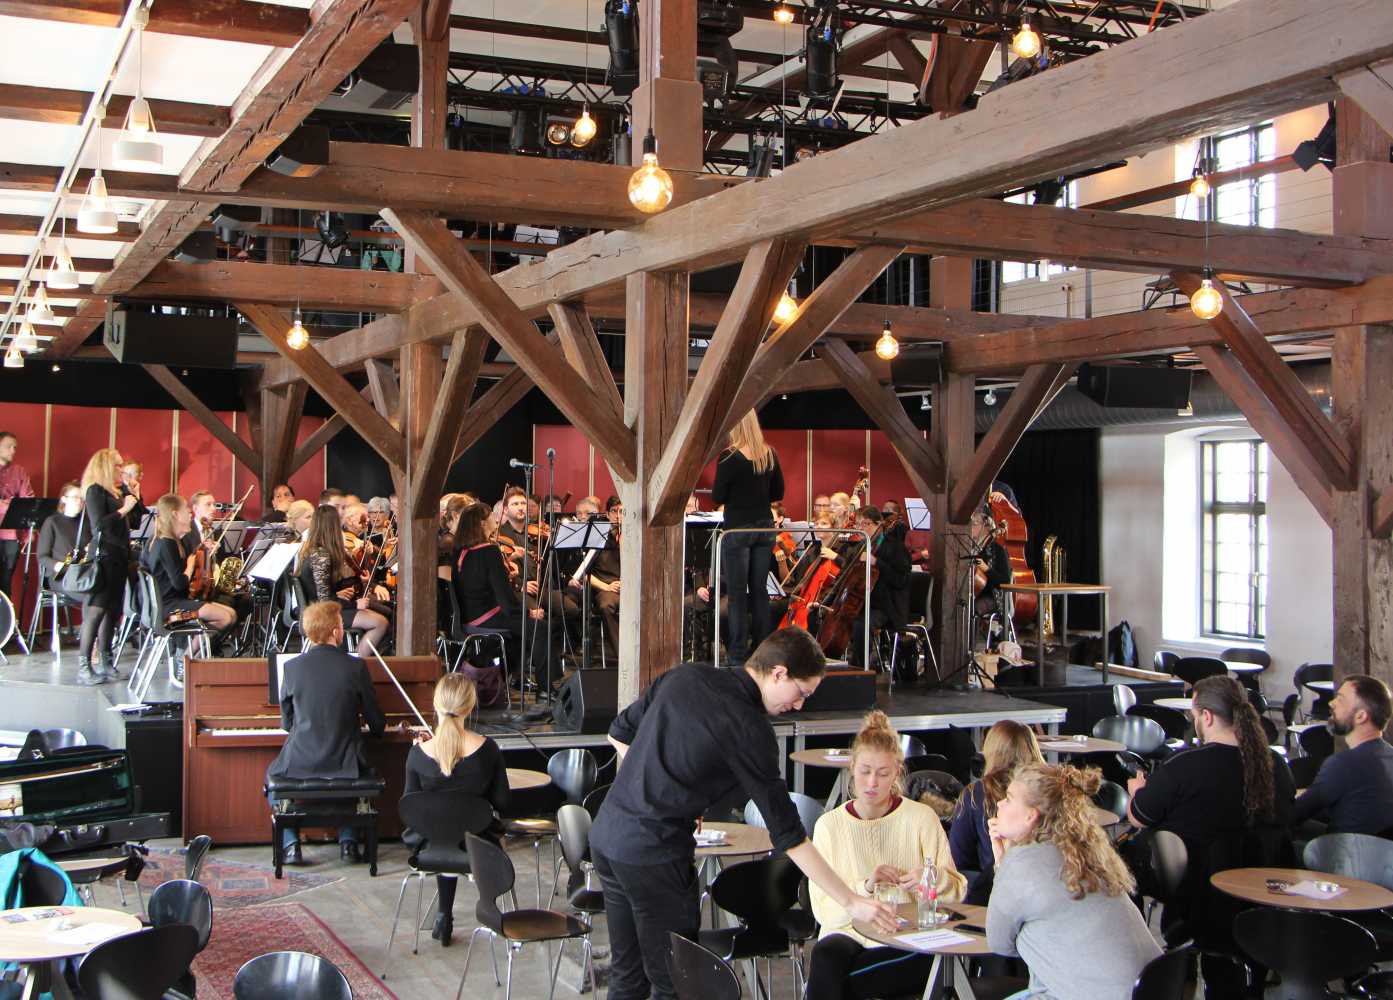 Tøjhuset has been converted from a dedicated classical music venue into a live music venue for all genres